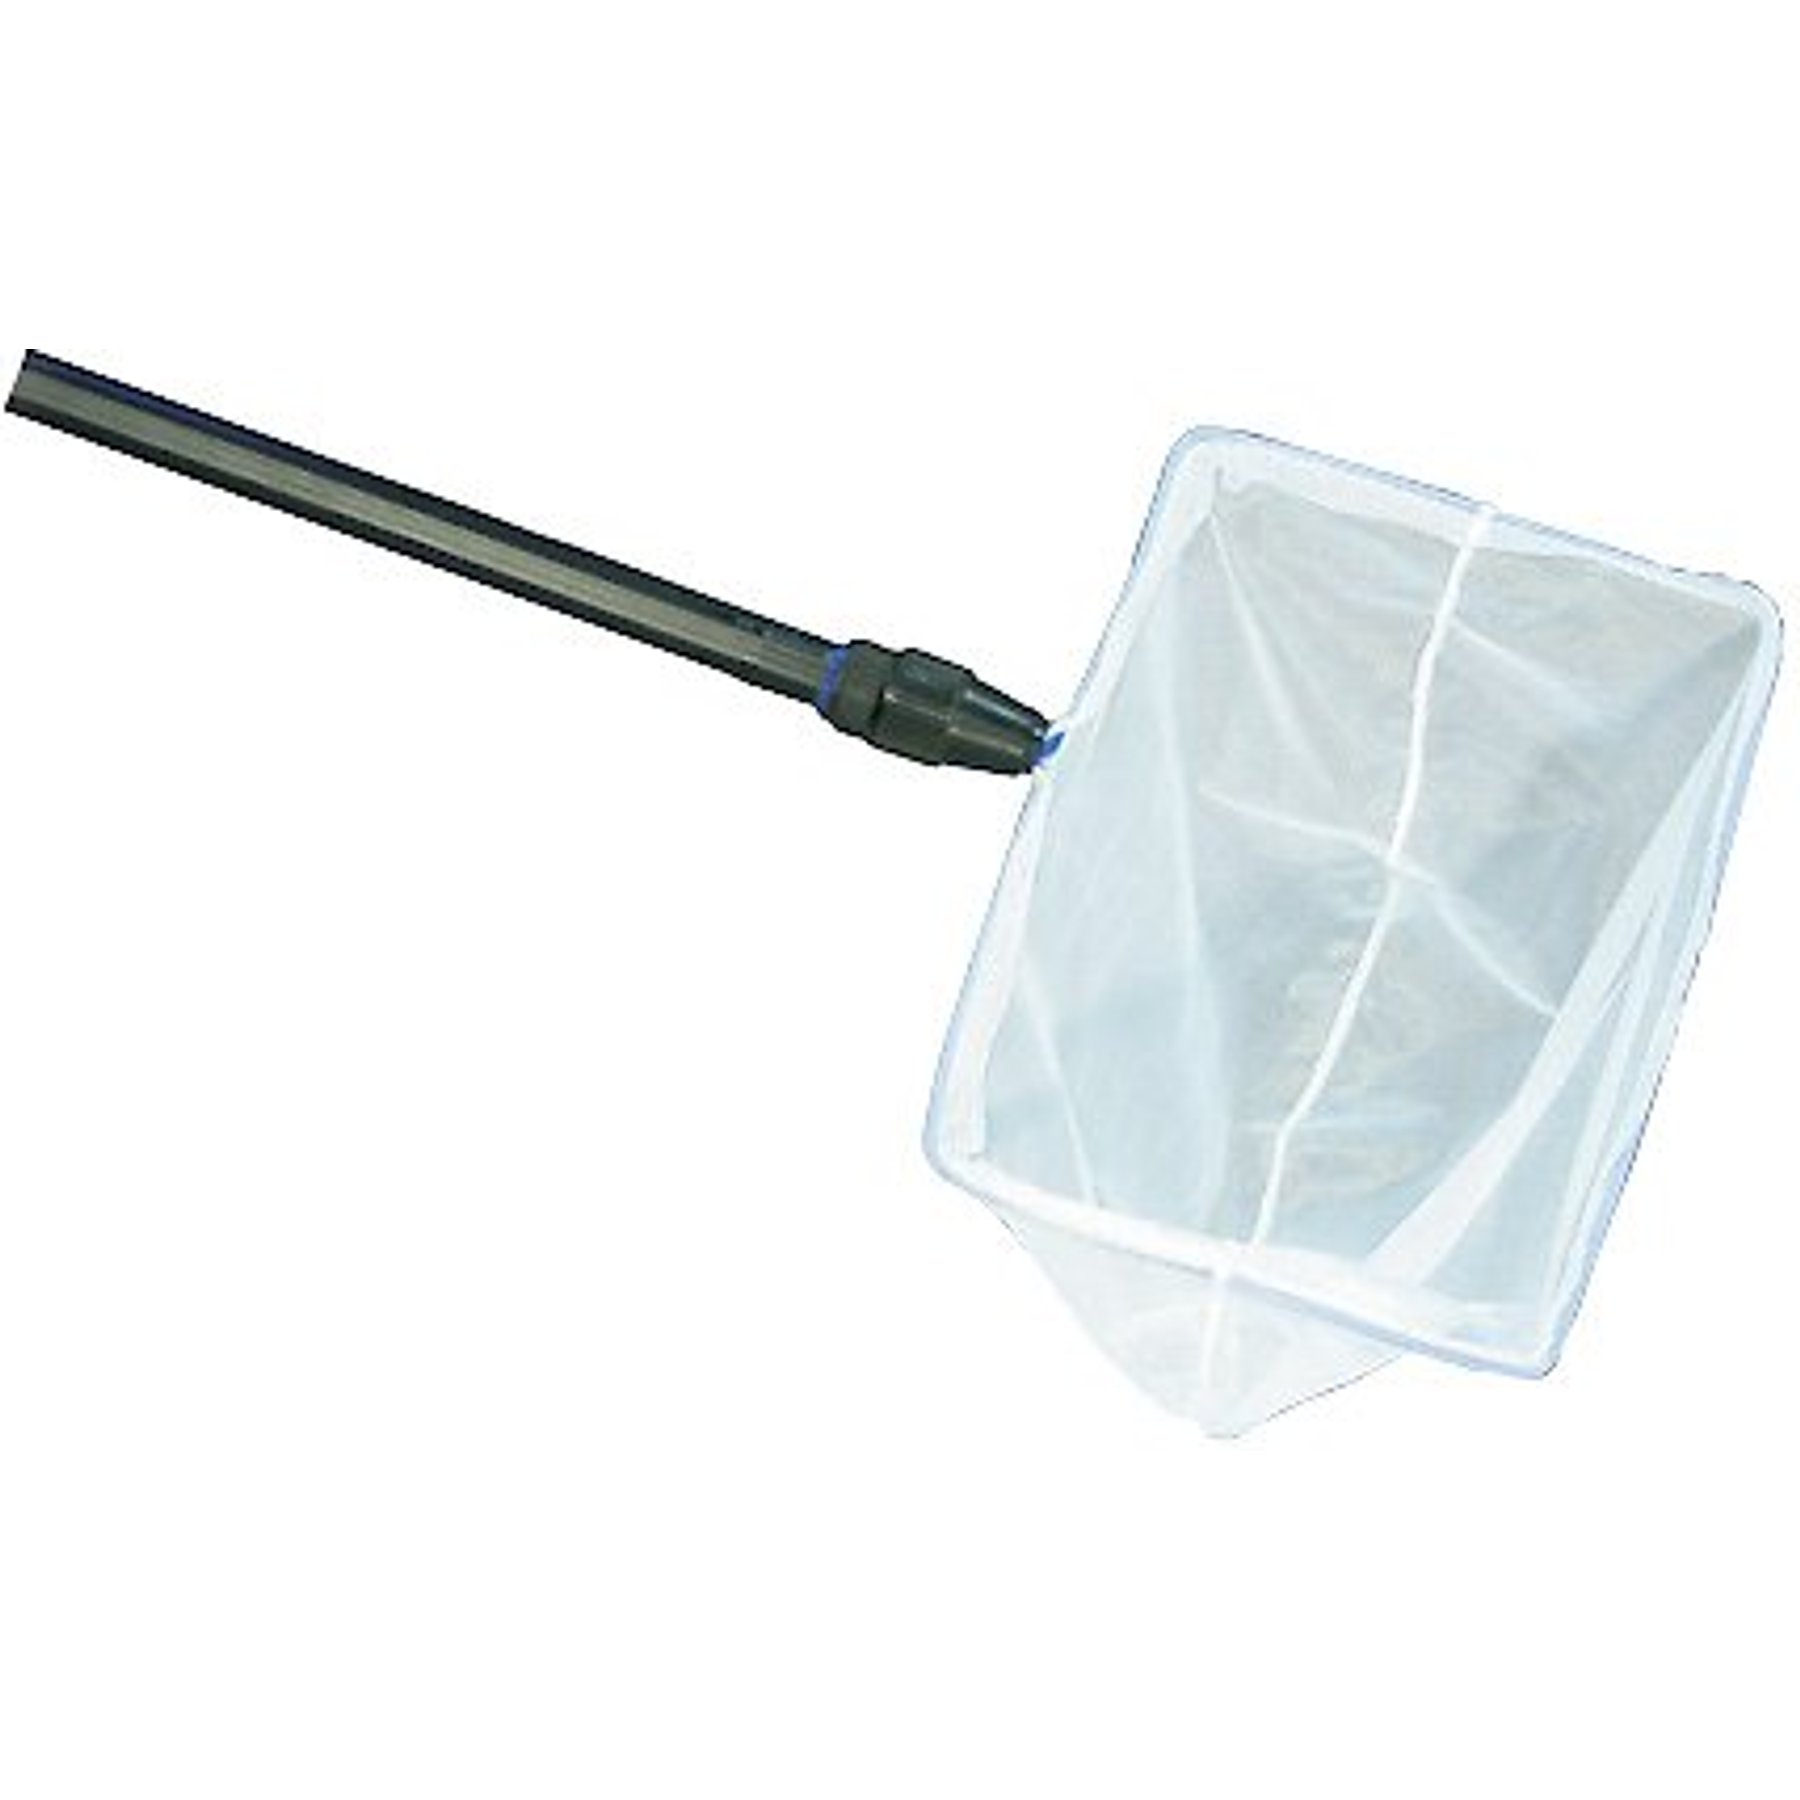 Aquascape - Pond Skimmer Net with Extendable Handle